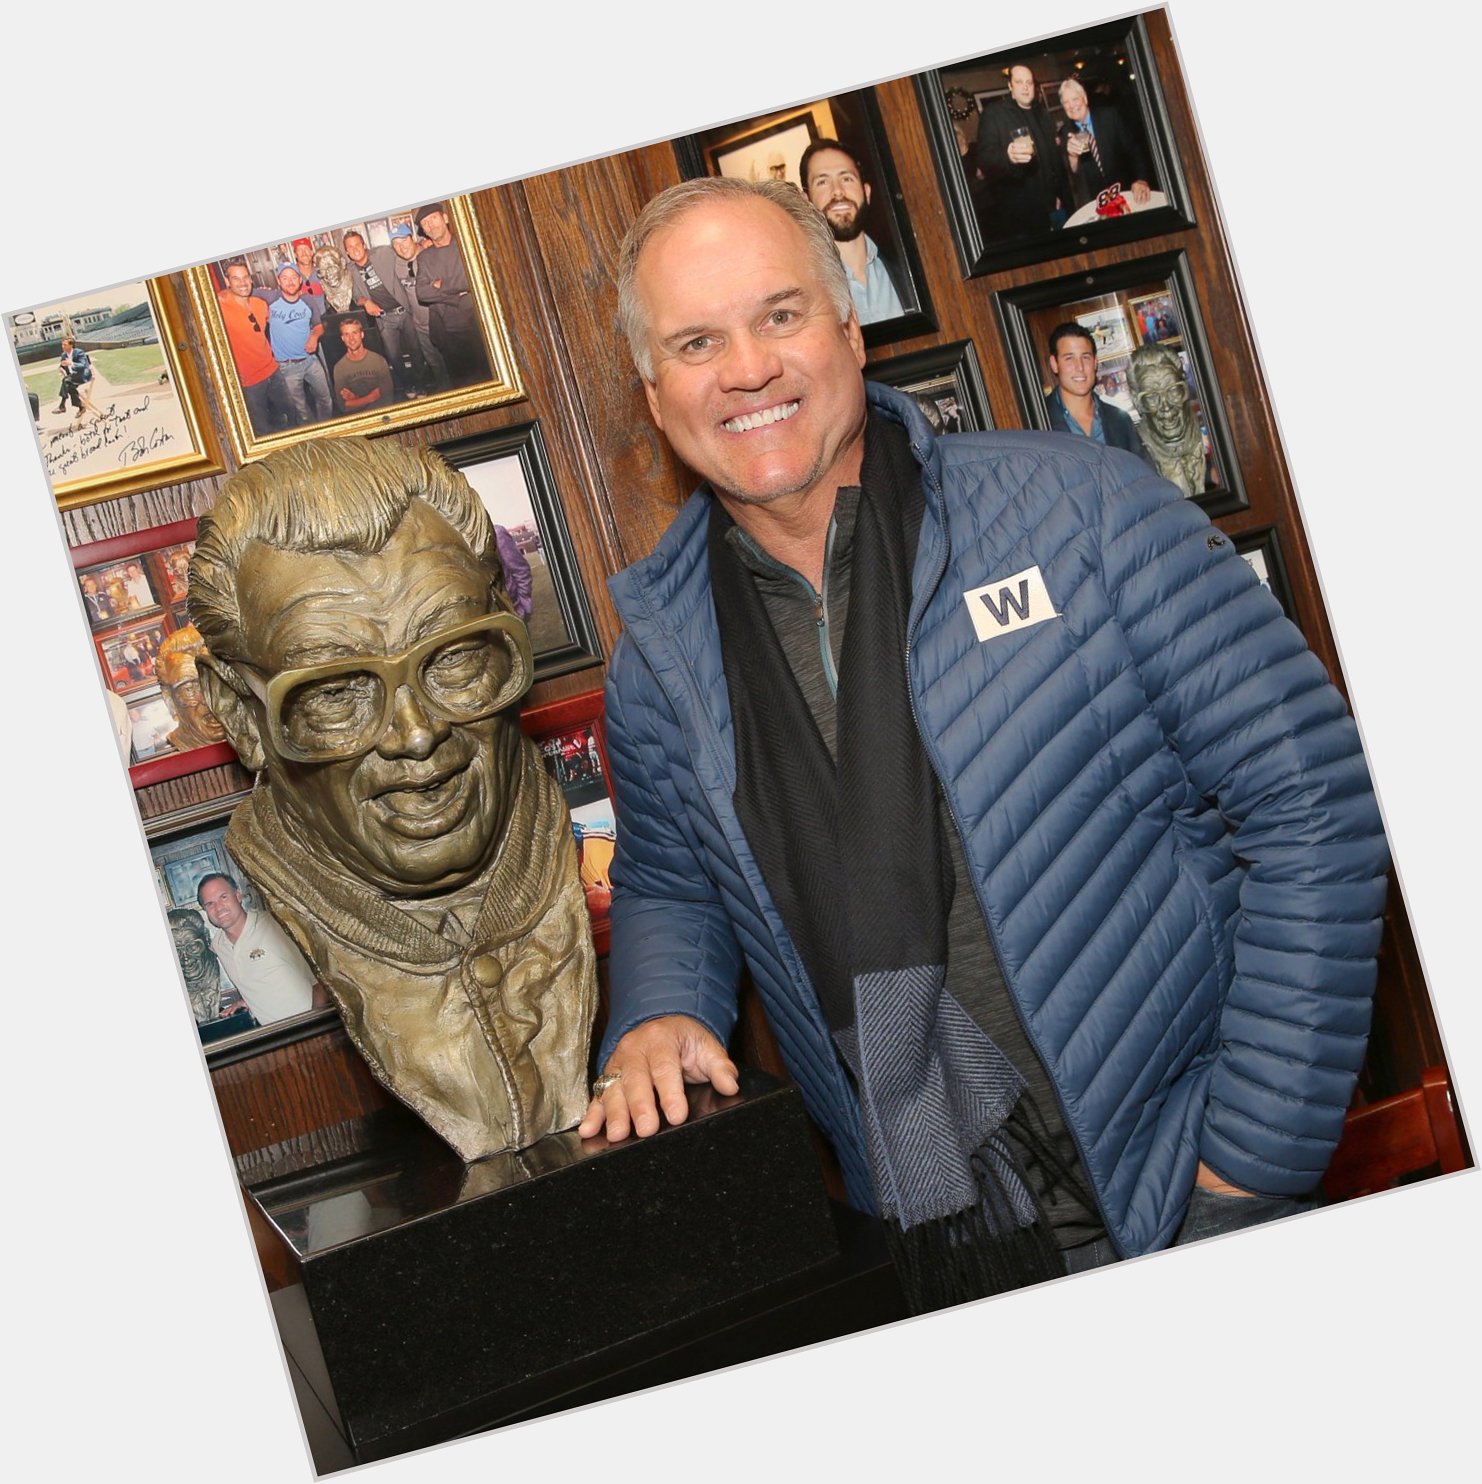 Happy birthday to our dear friend, partner and Chicago Cubs legend Ryne Sandberg! We love you Ryne! 